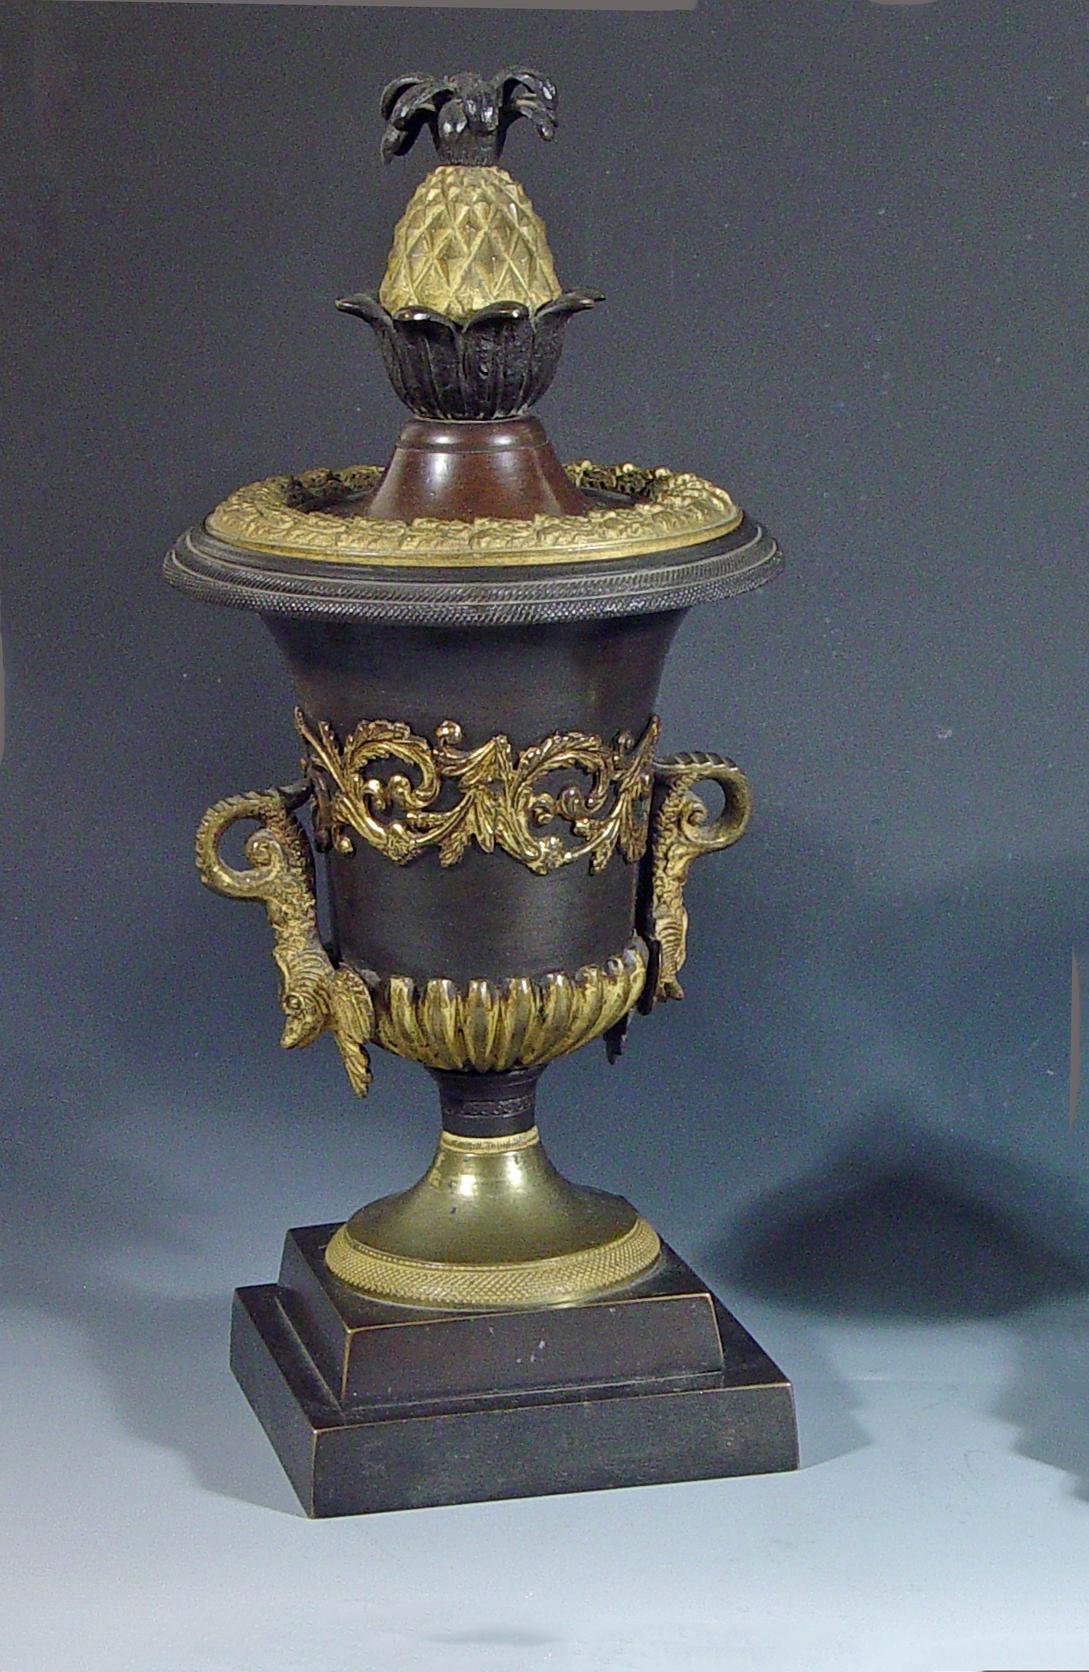 19th Century Regency Bronze and Ormolu Candlestick Urns with Pineapple Reversible Tops For Sale